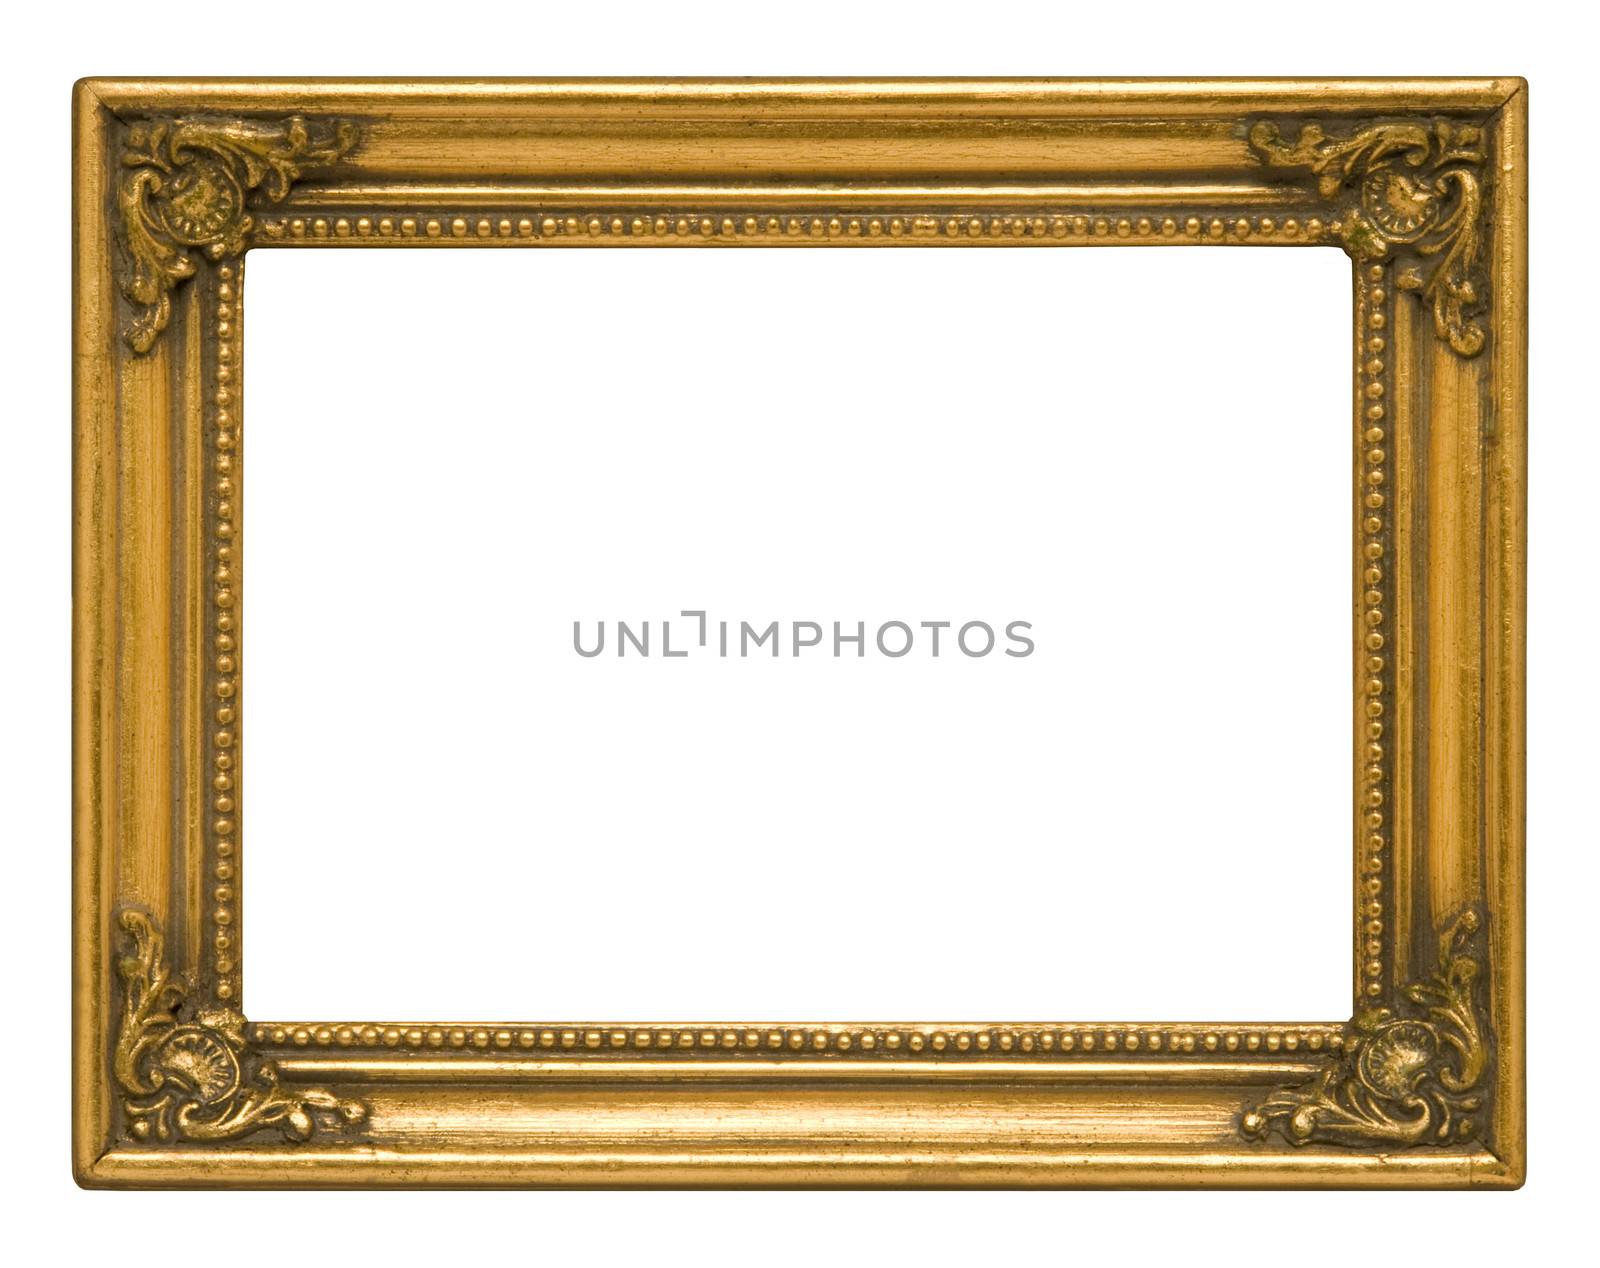 Antique gold horizontal picture frame against white background